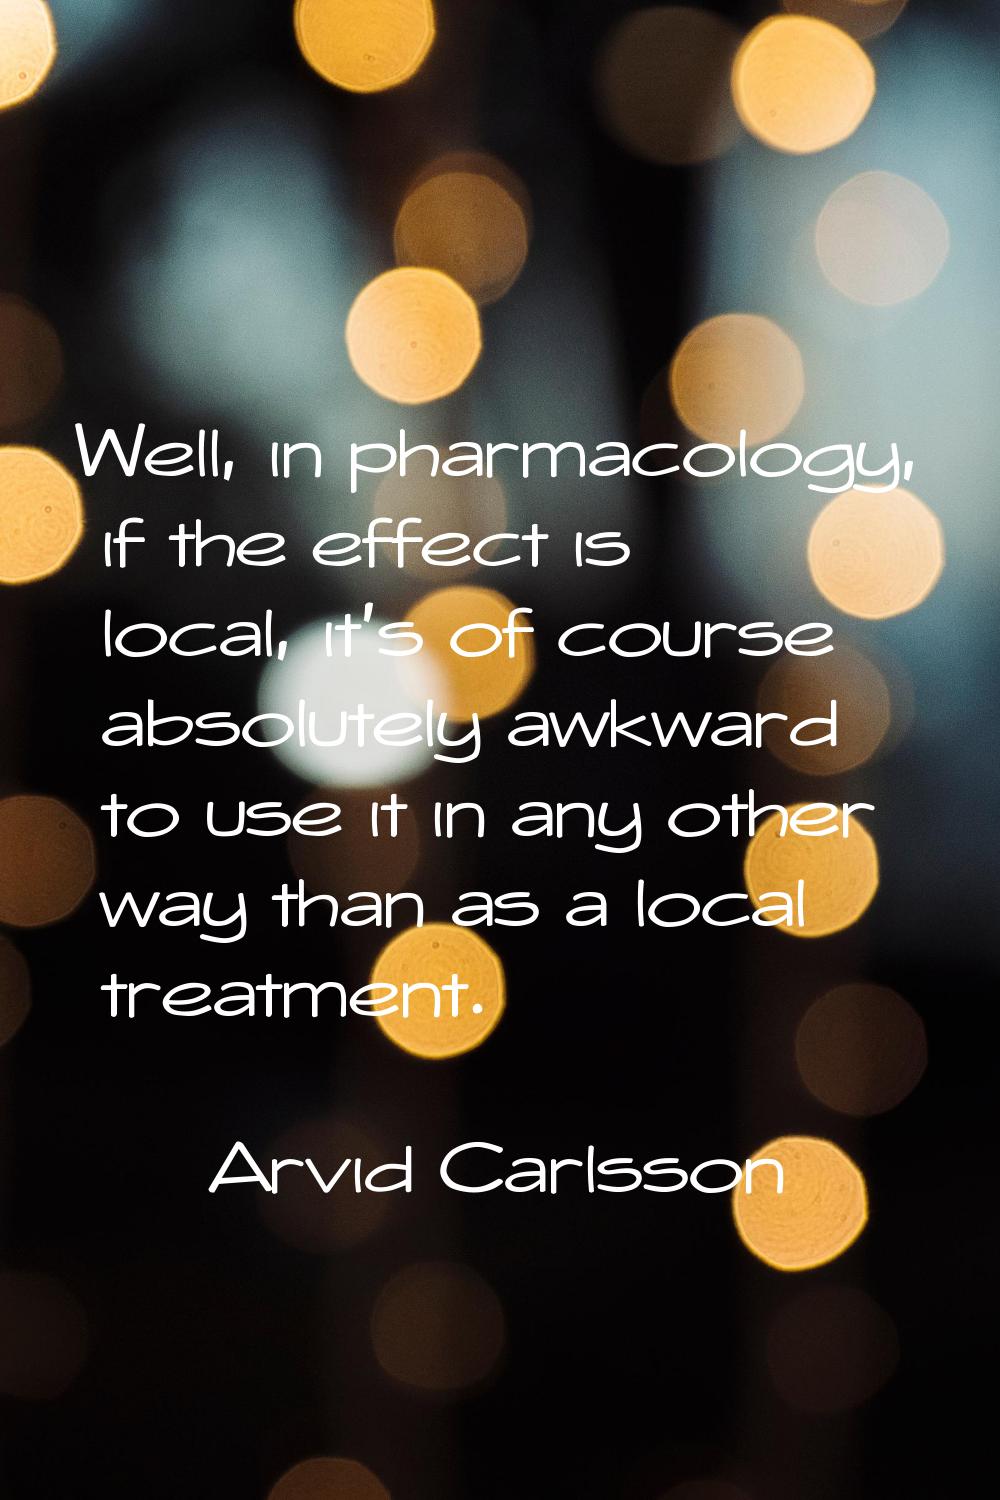 Well, in pharmacology, if the effect is local, it's of course absolutely awkward to use it in any o